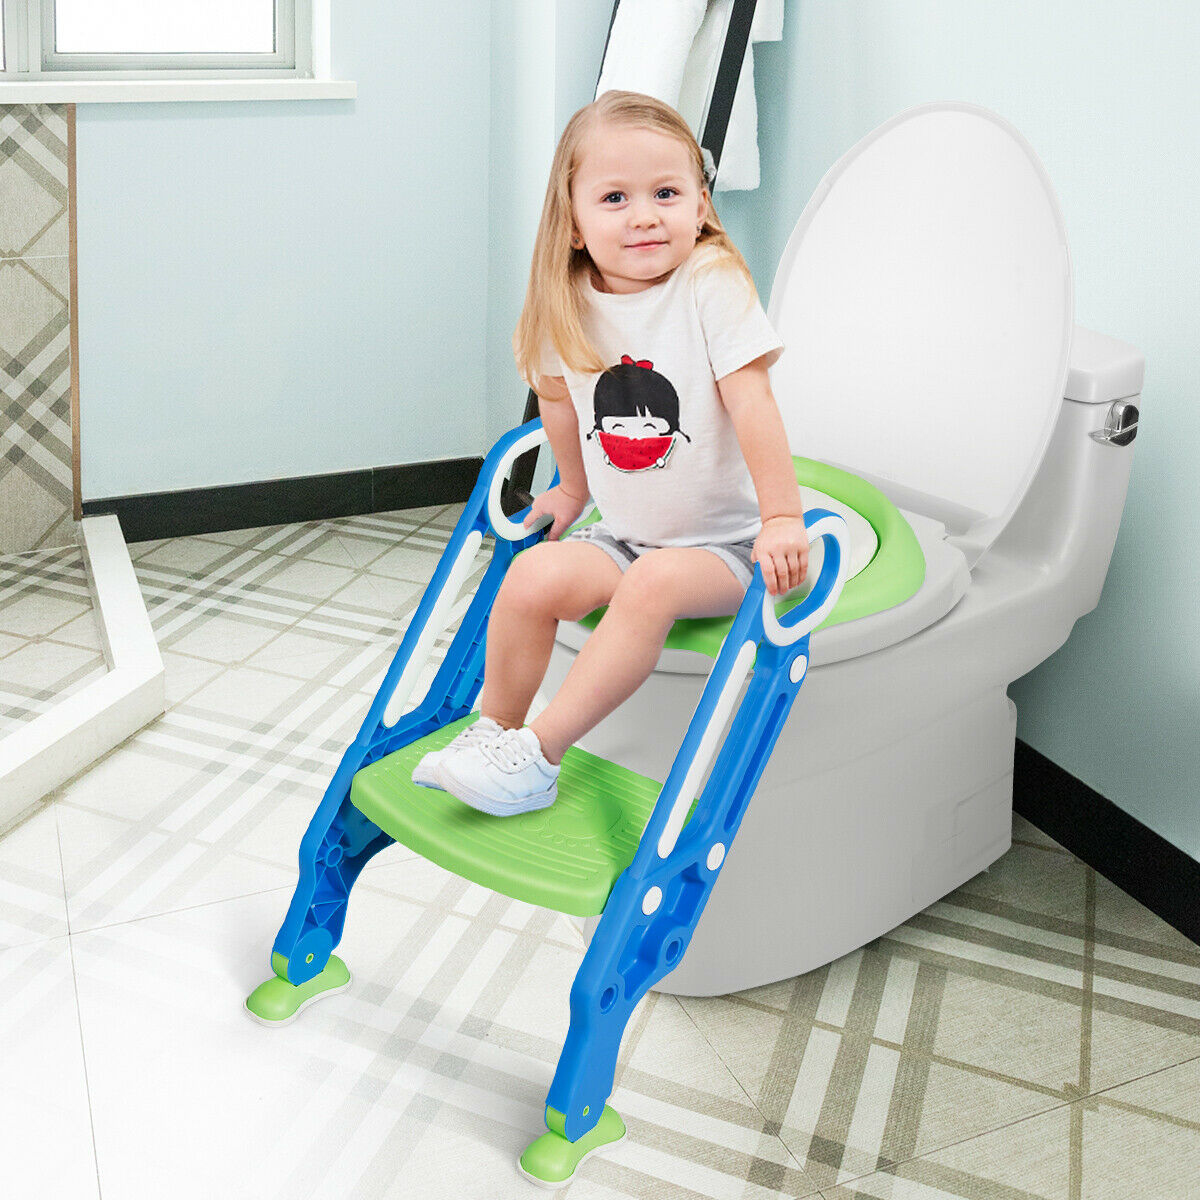 Foldable Potty Training Toilet Seat W/ Step Stool Ladder Adjustable For Kids